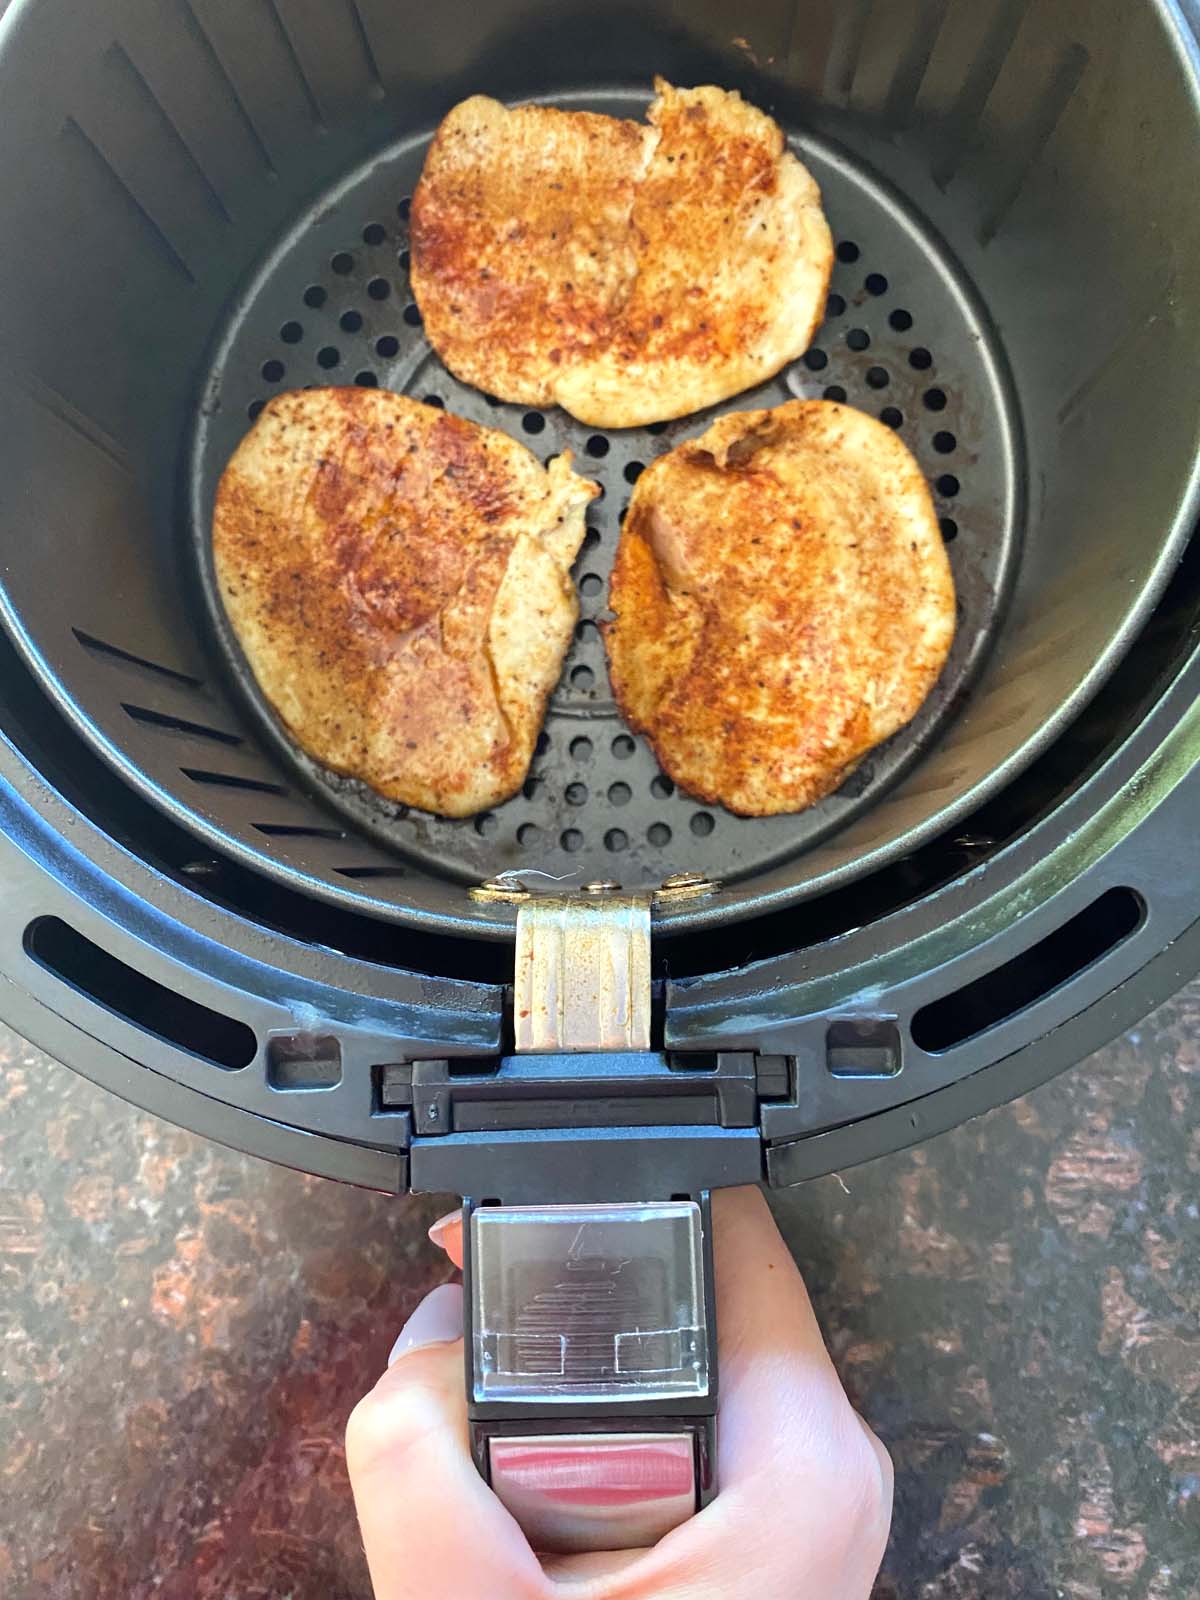 Hand holding handle of air fryer basket that has 3 pieces of cooked meat inside.